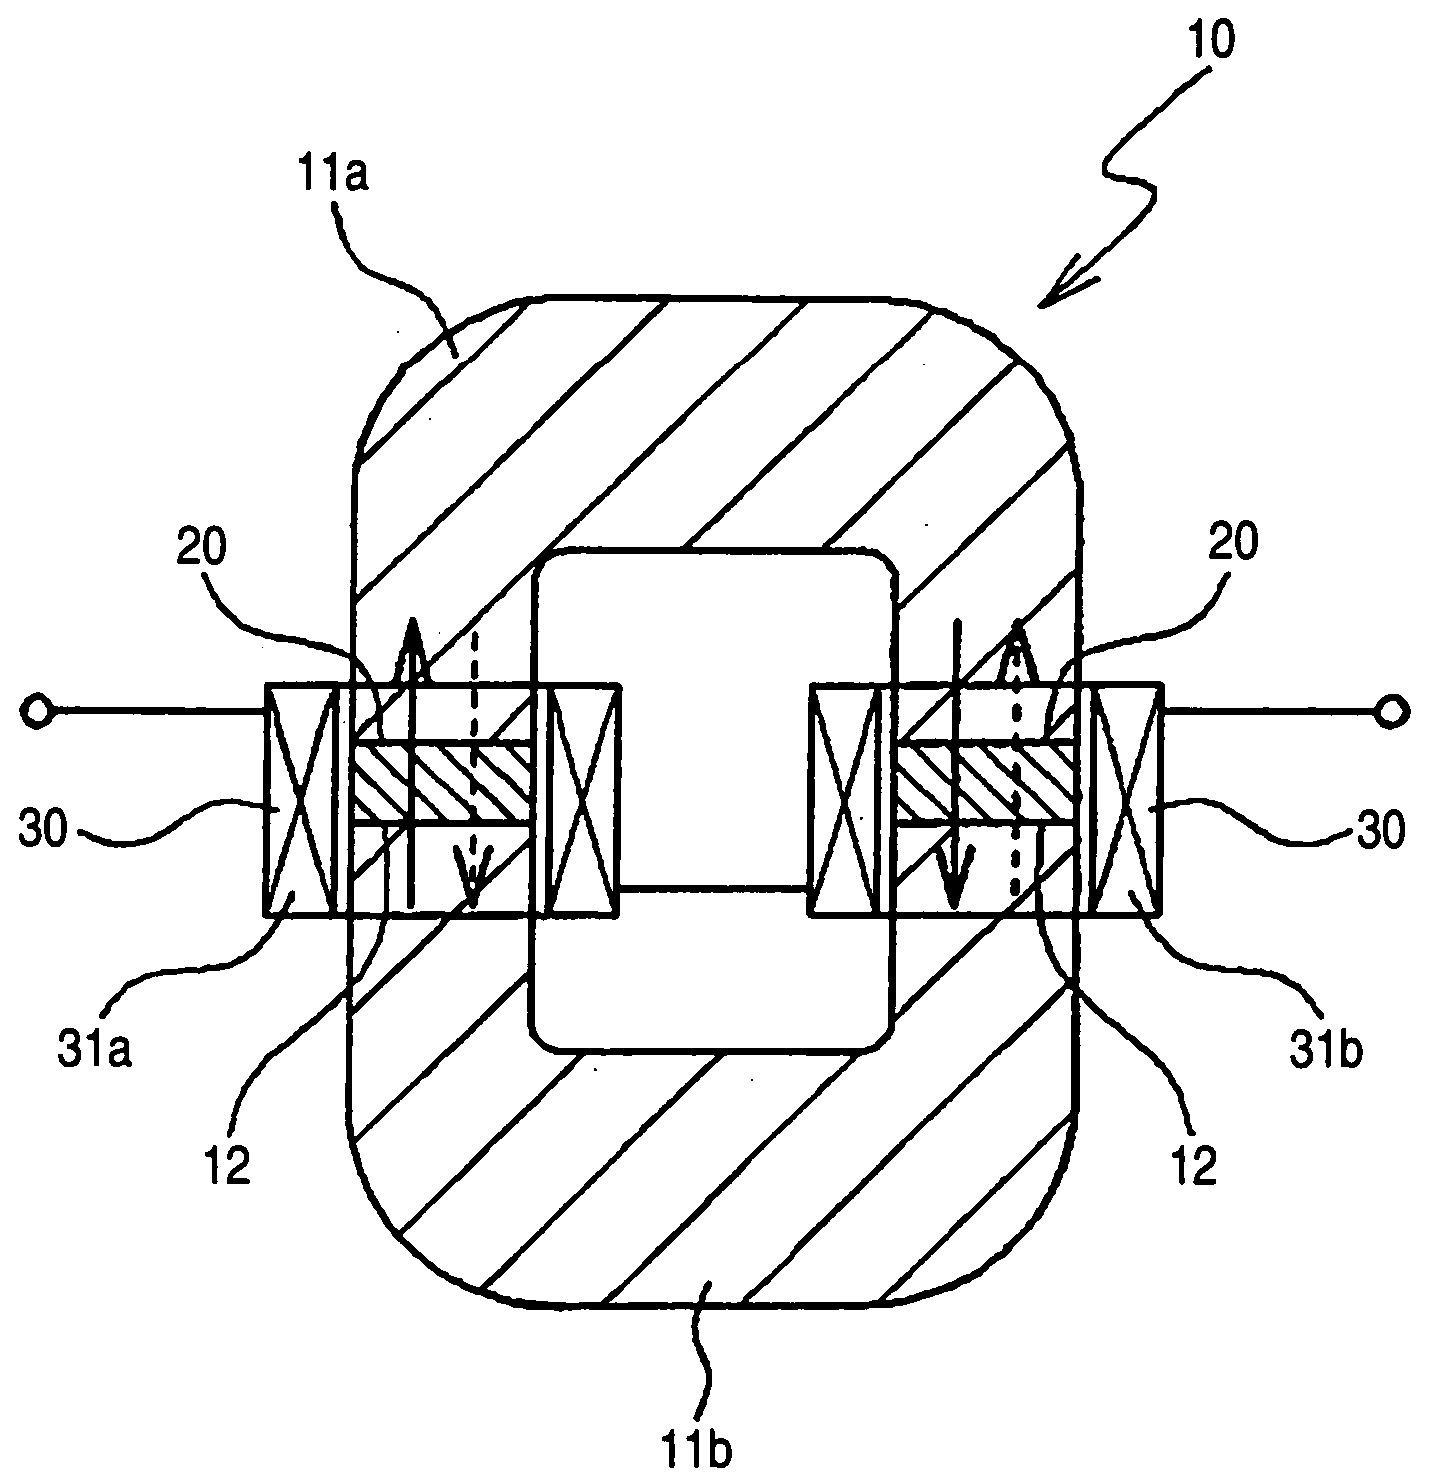 Bond magnet for direct current reactor and direct current reactor